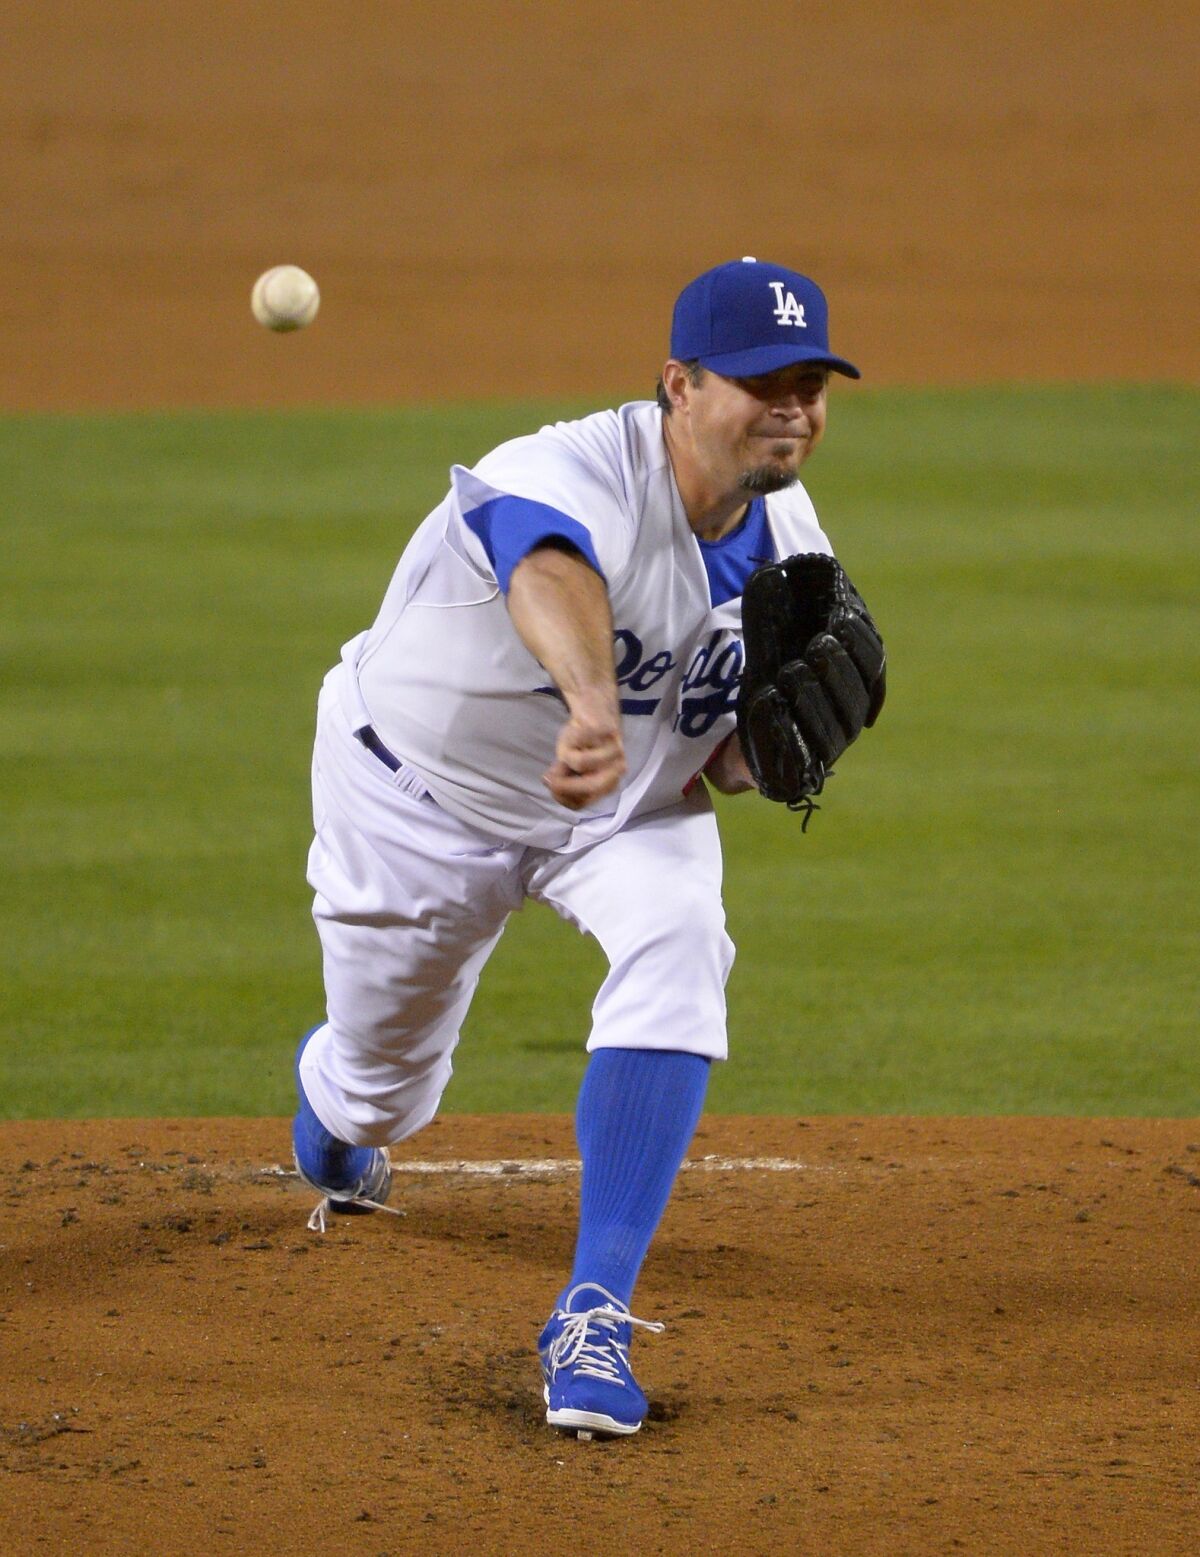 Dodgers pitcher Josh Beckett, shown pitching in May, is scheduled to undergo season-ending surgery the week of July 8.